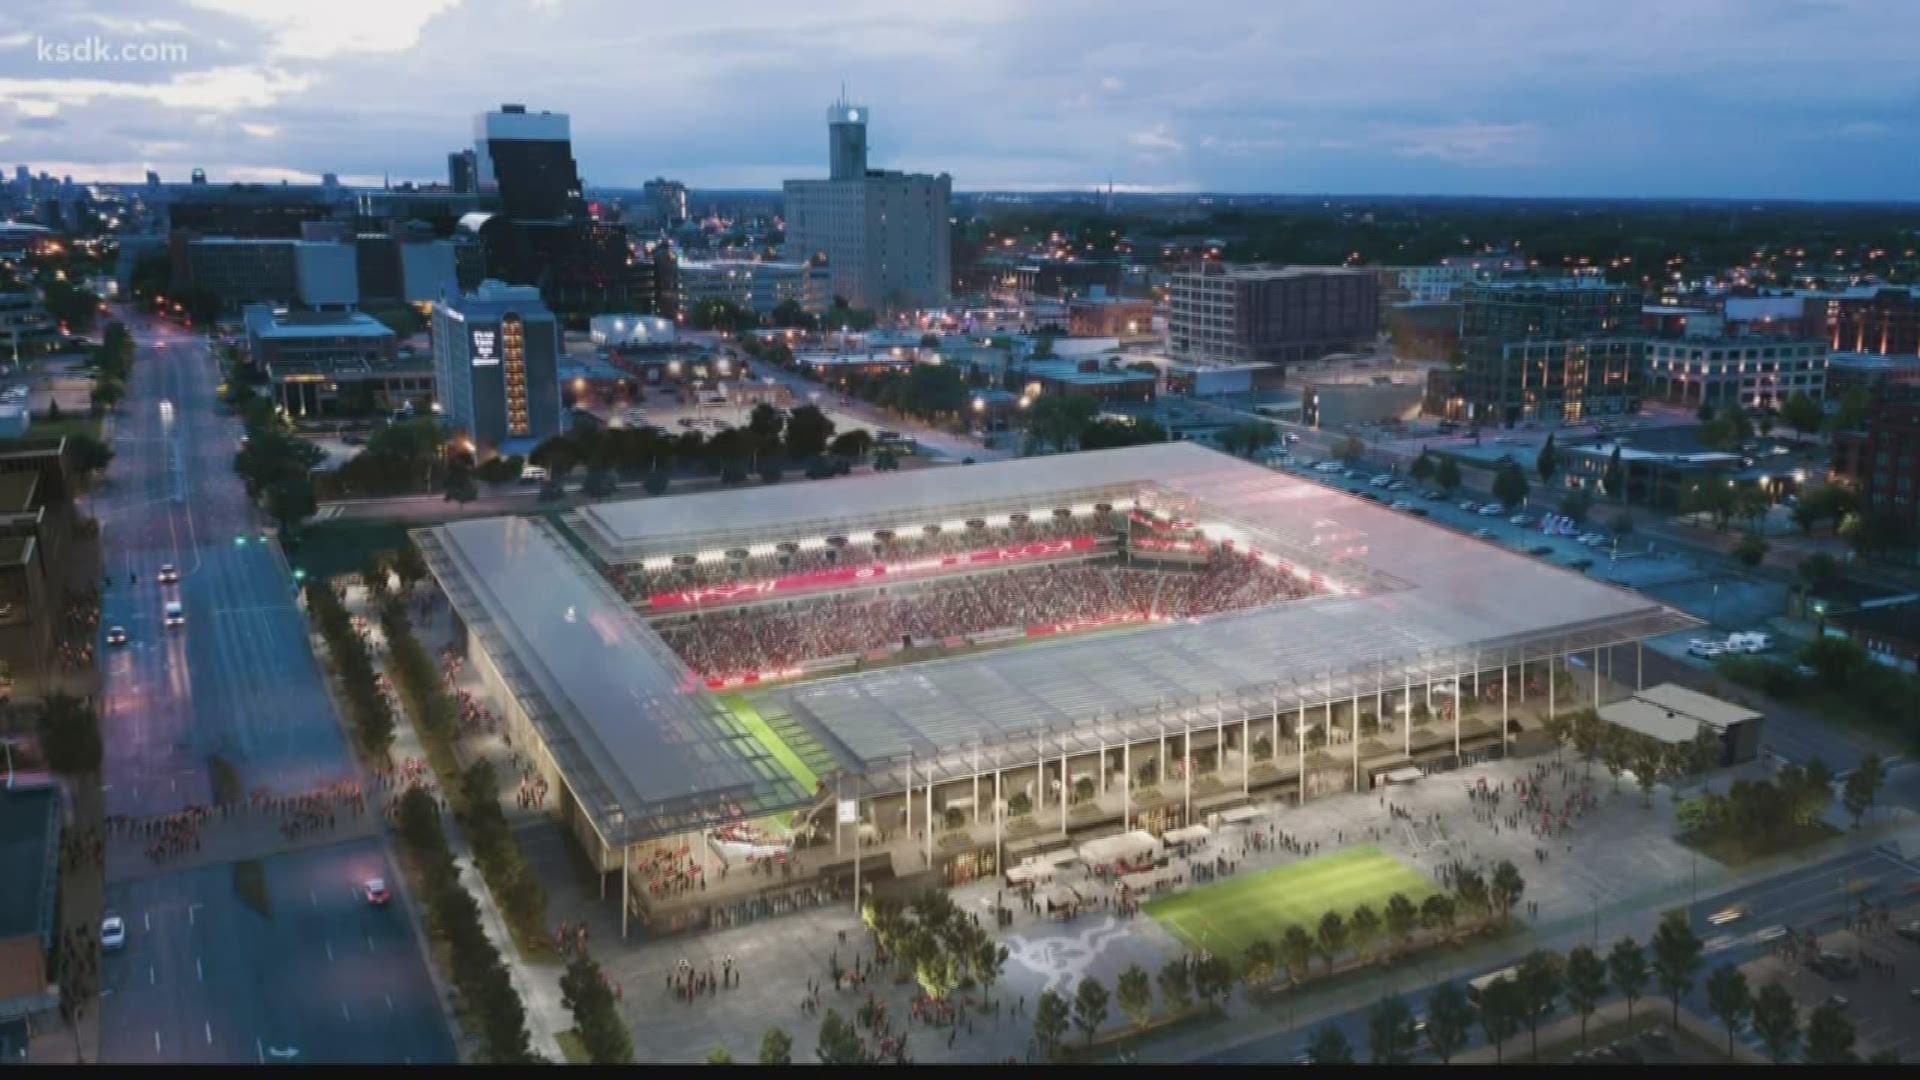 A typically stadium-skeptical St. Louis Board of Aldermen passed a massive development deal. So, why did this stadium deal pass where others have failed?